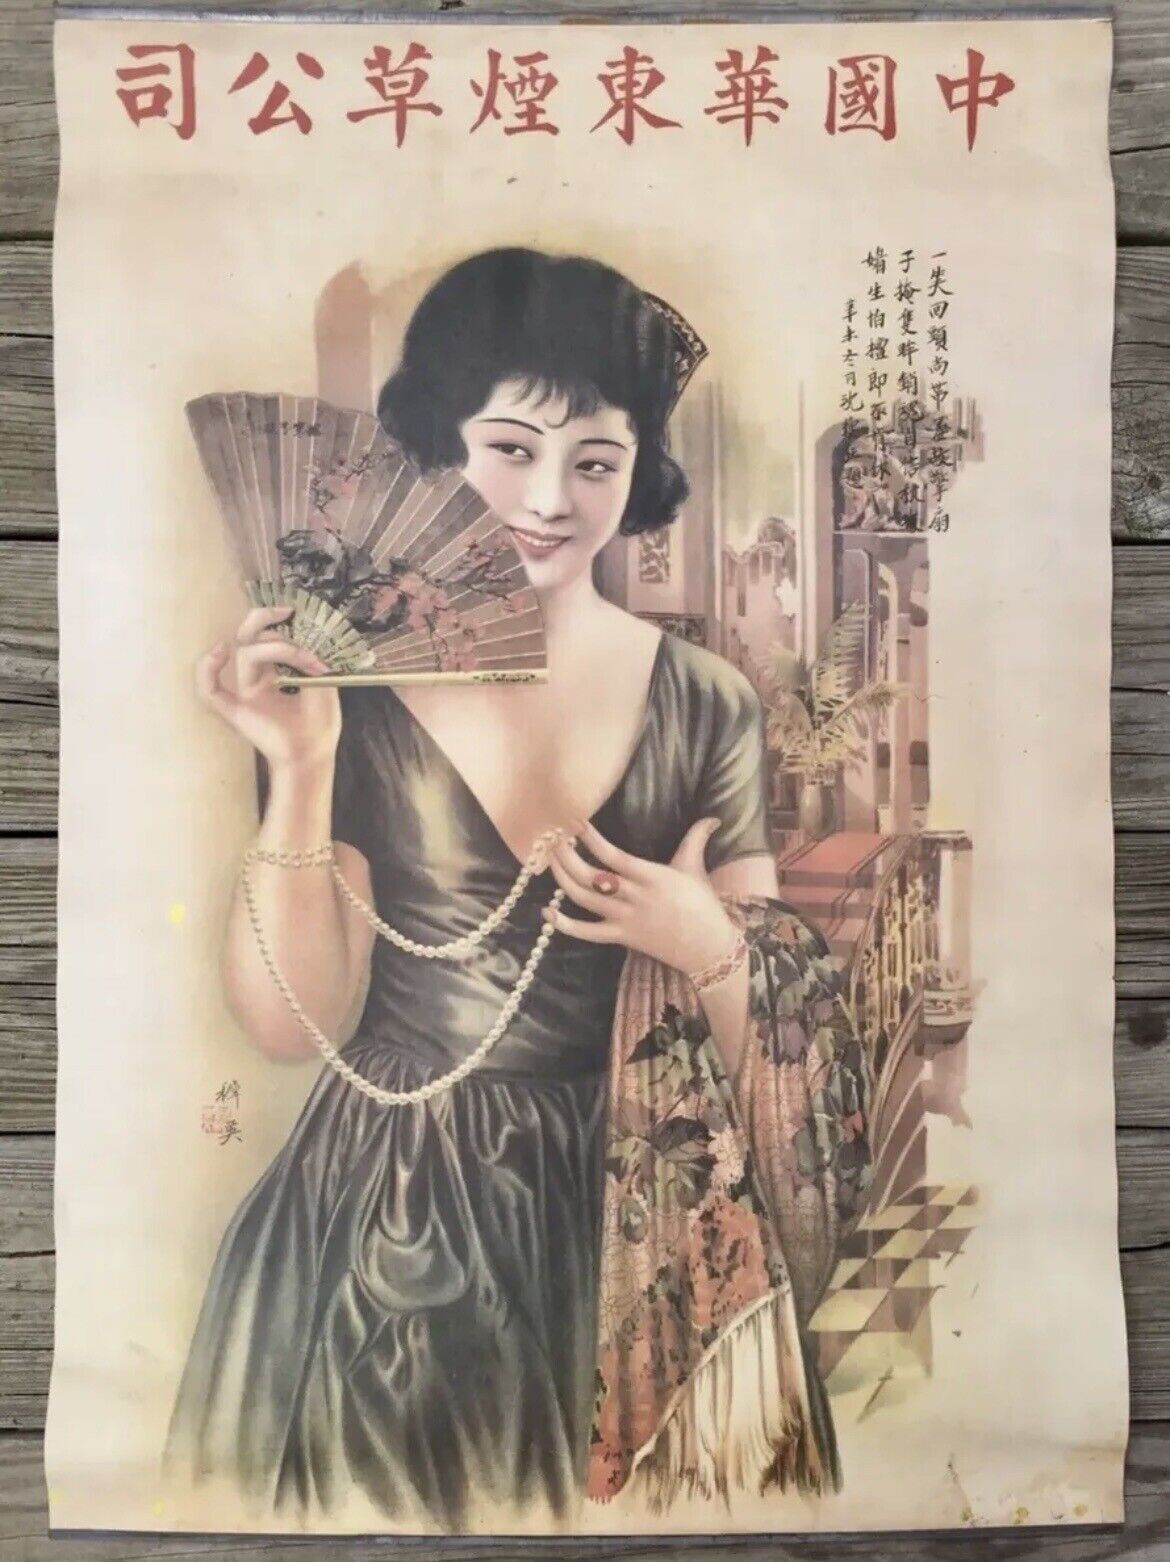 Chinese Woman with a Fan Vintage Tobacco Advertising Poster, 31” x 19.5”